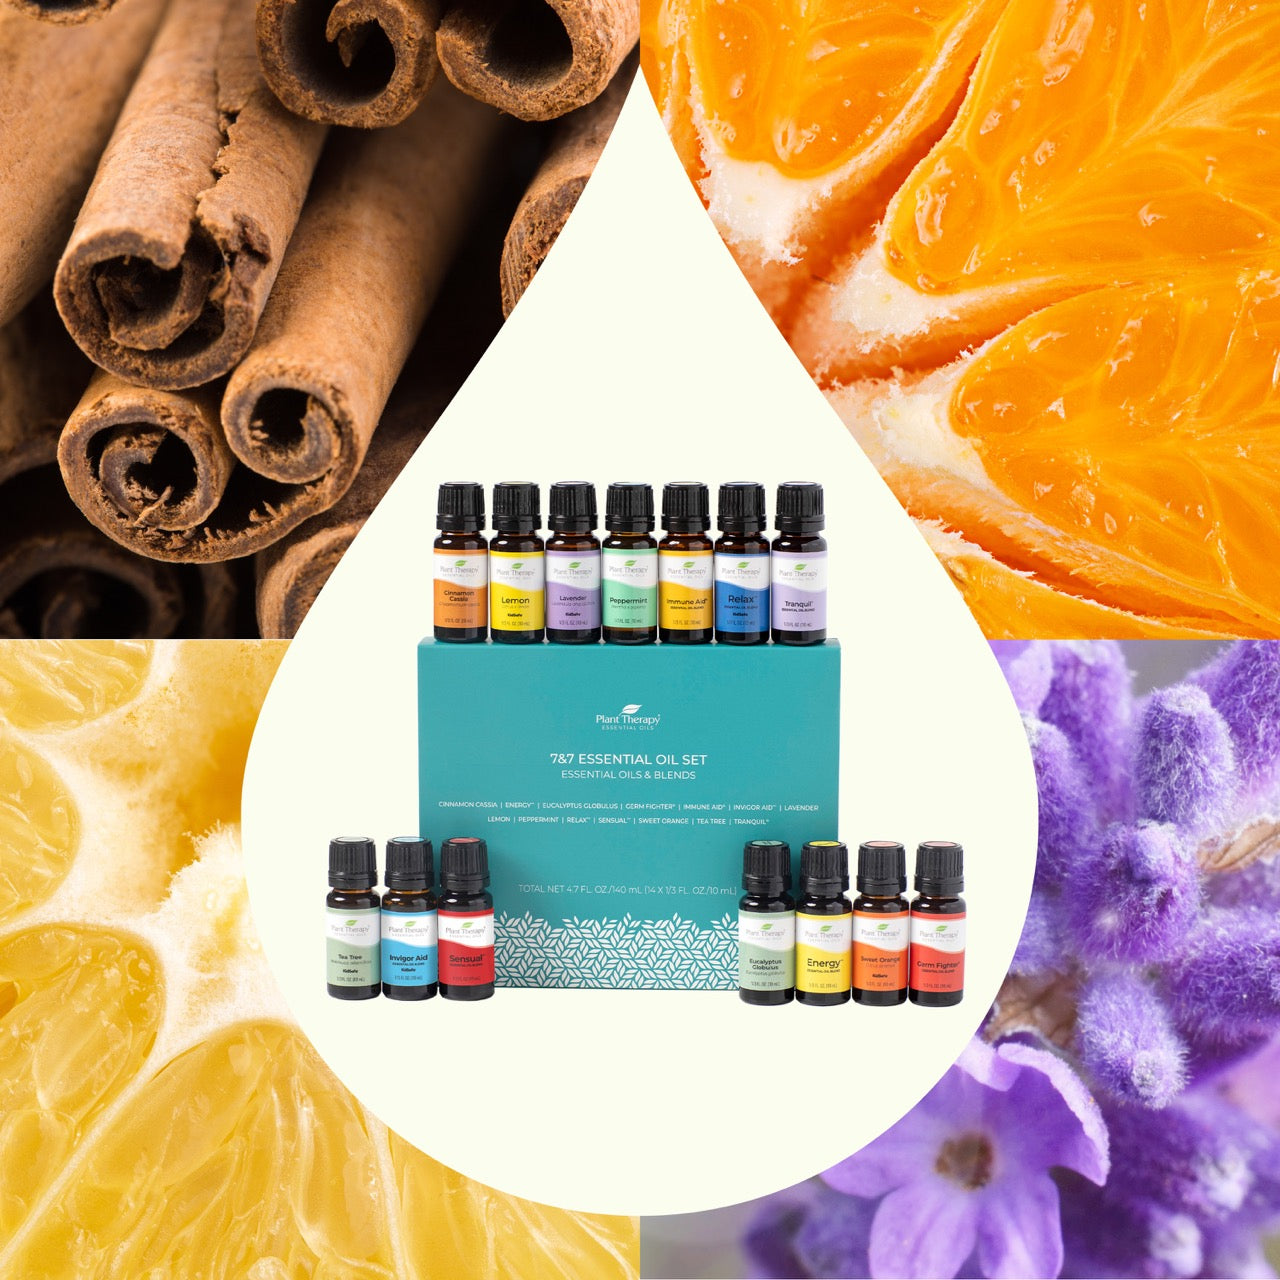 7 & 7 Essential Oil Set with key ingredient images